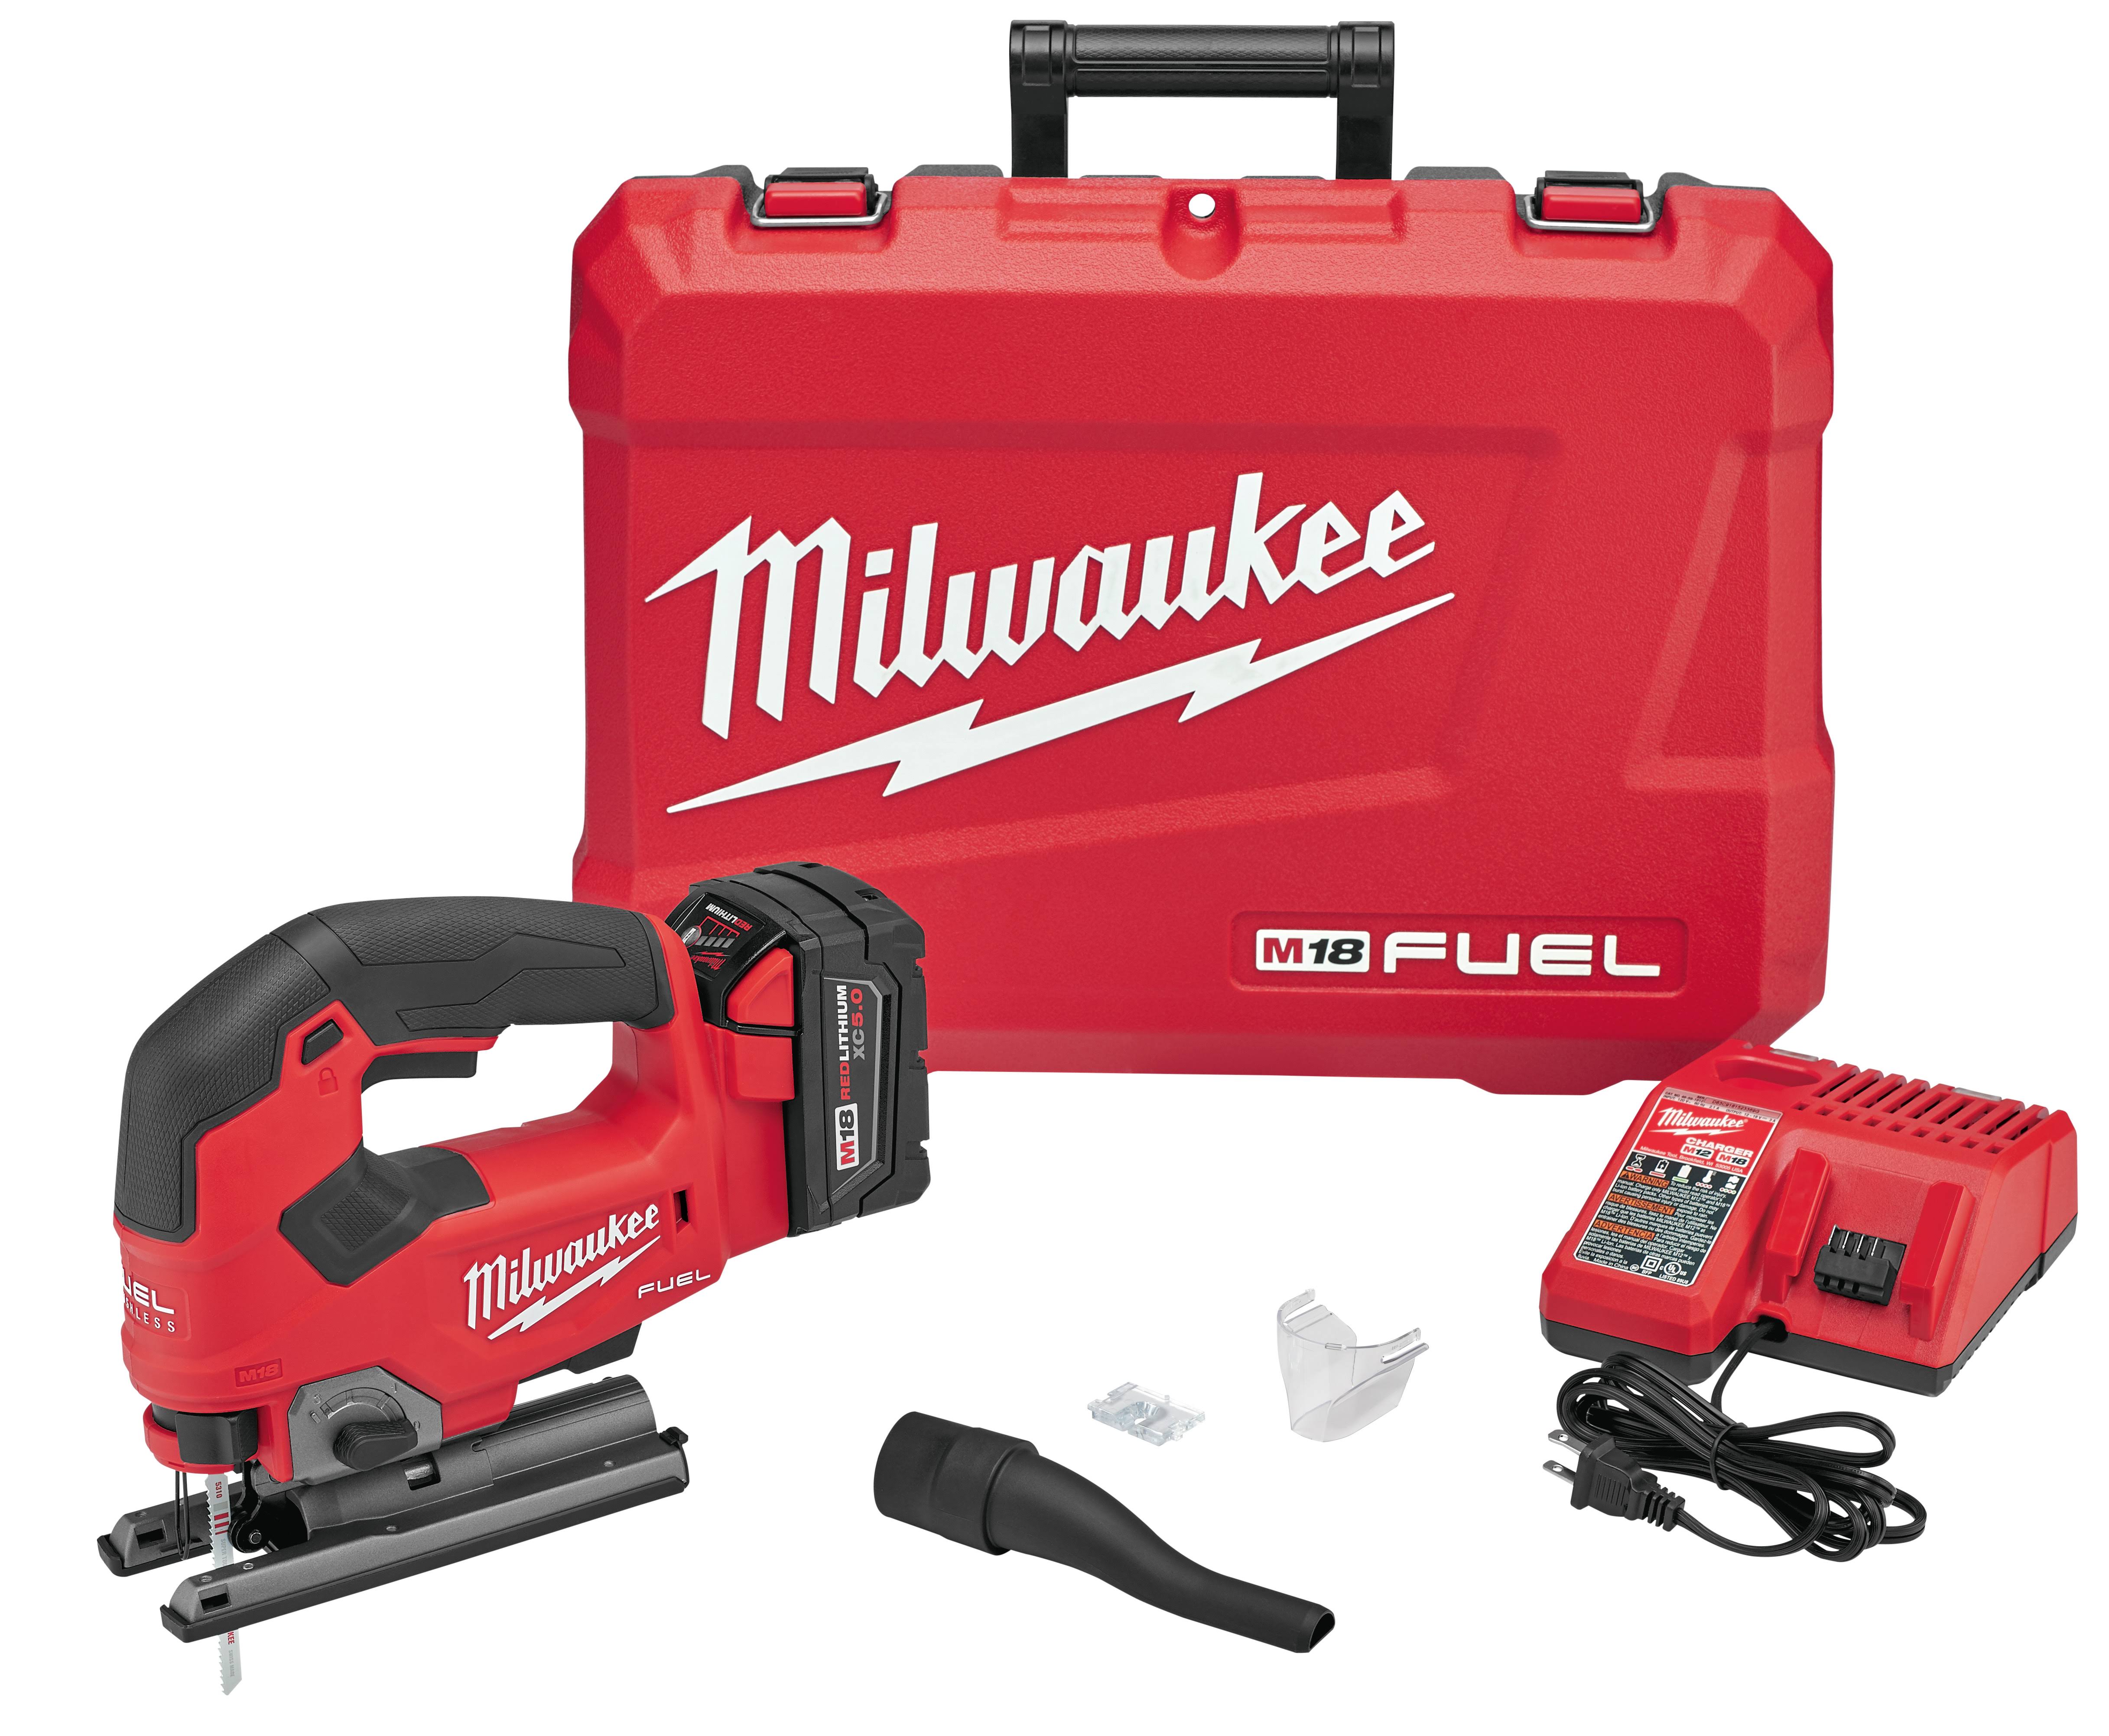 Milwaukee 2737 21 M18 Fuel 18V Cordless Brushless Jig Saw Kit with 5 0AH Battery